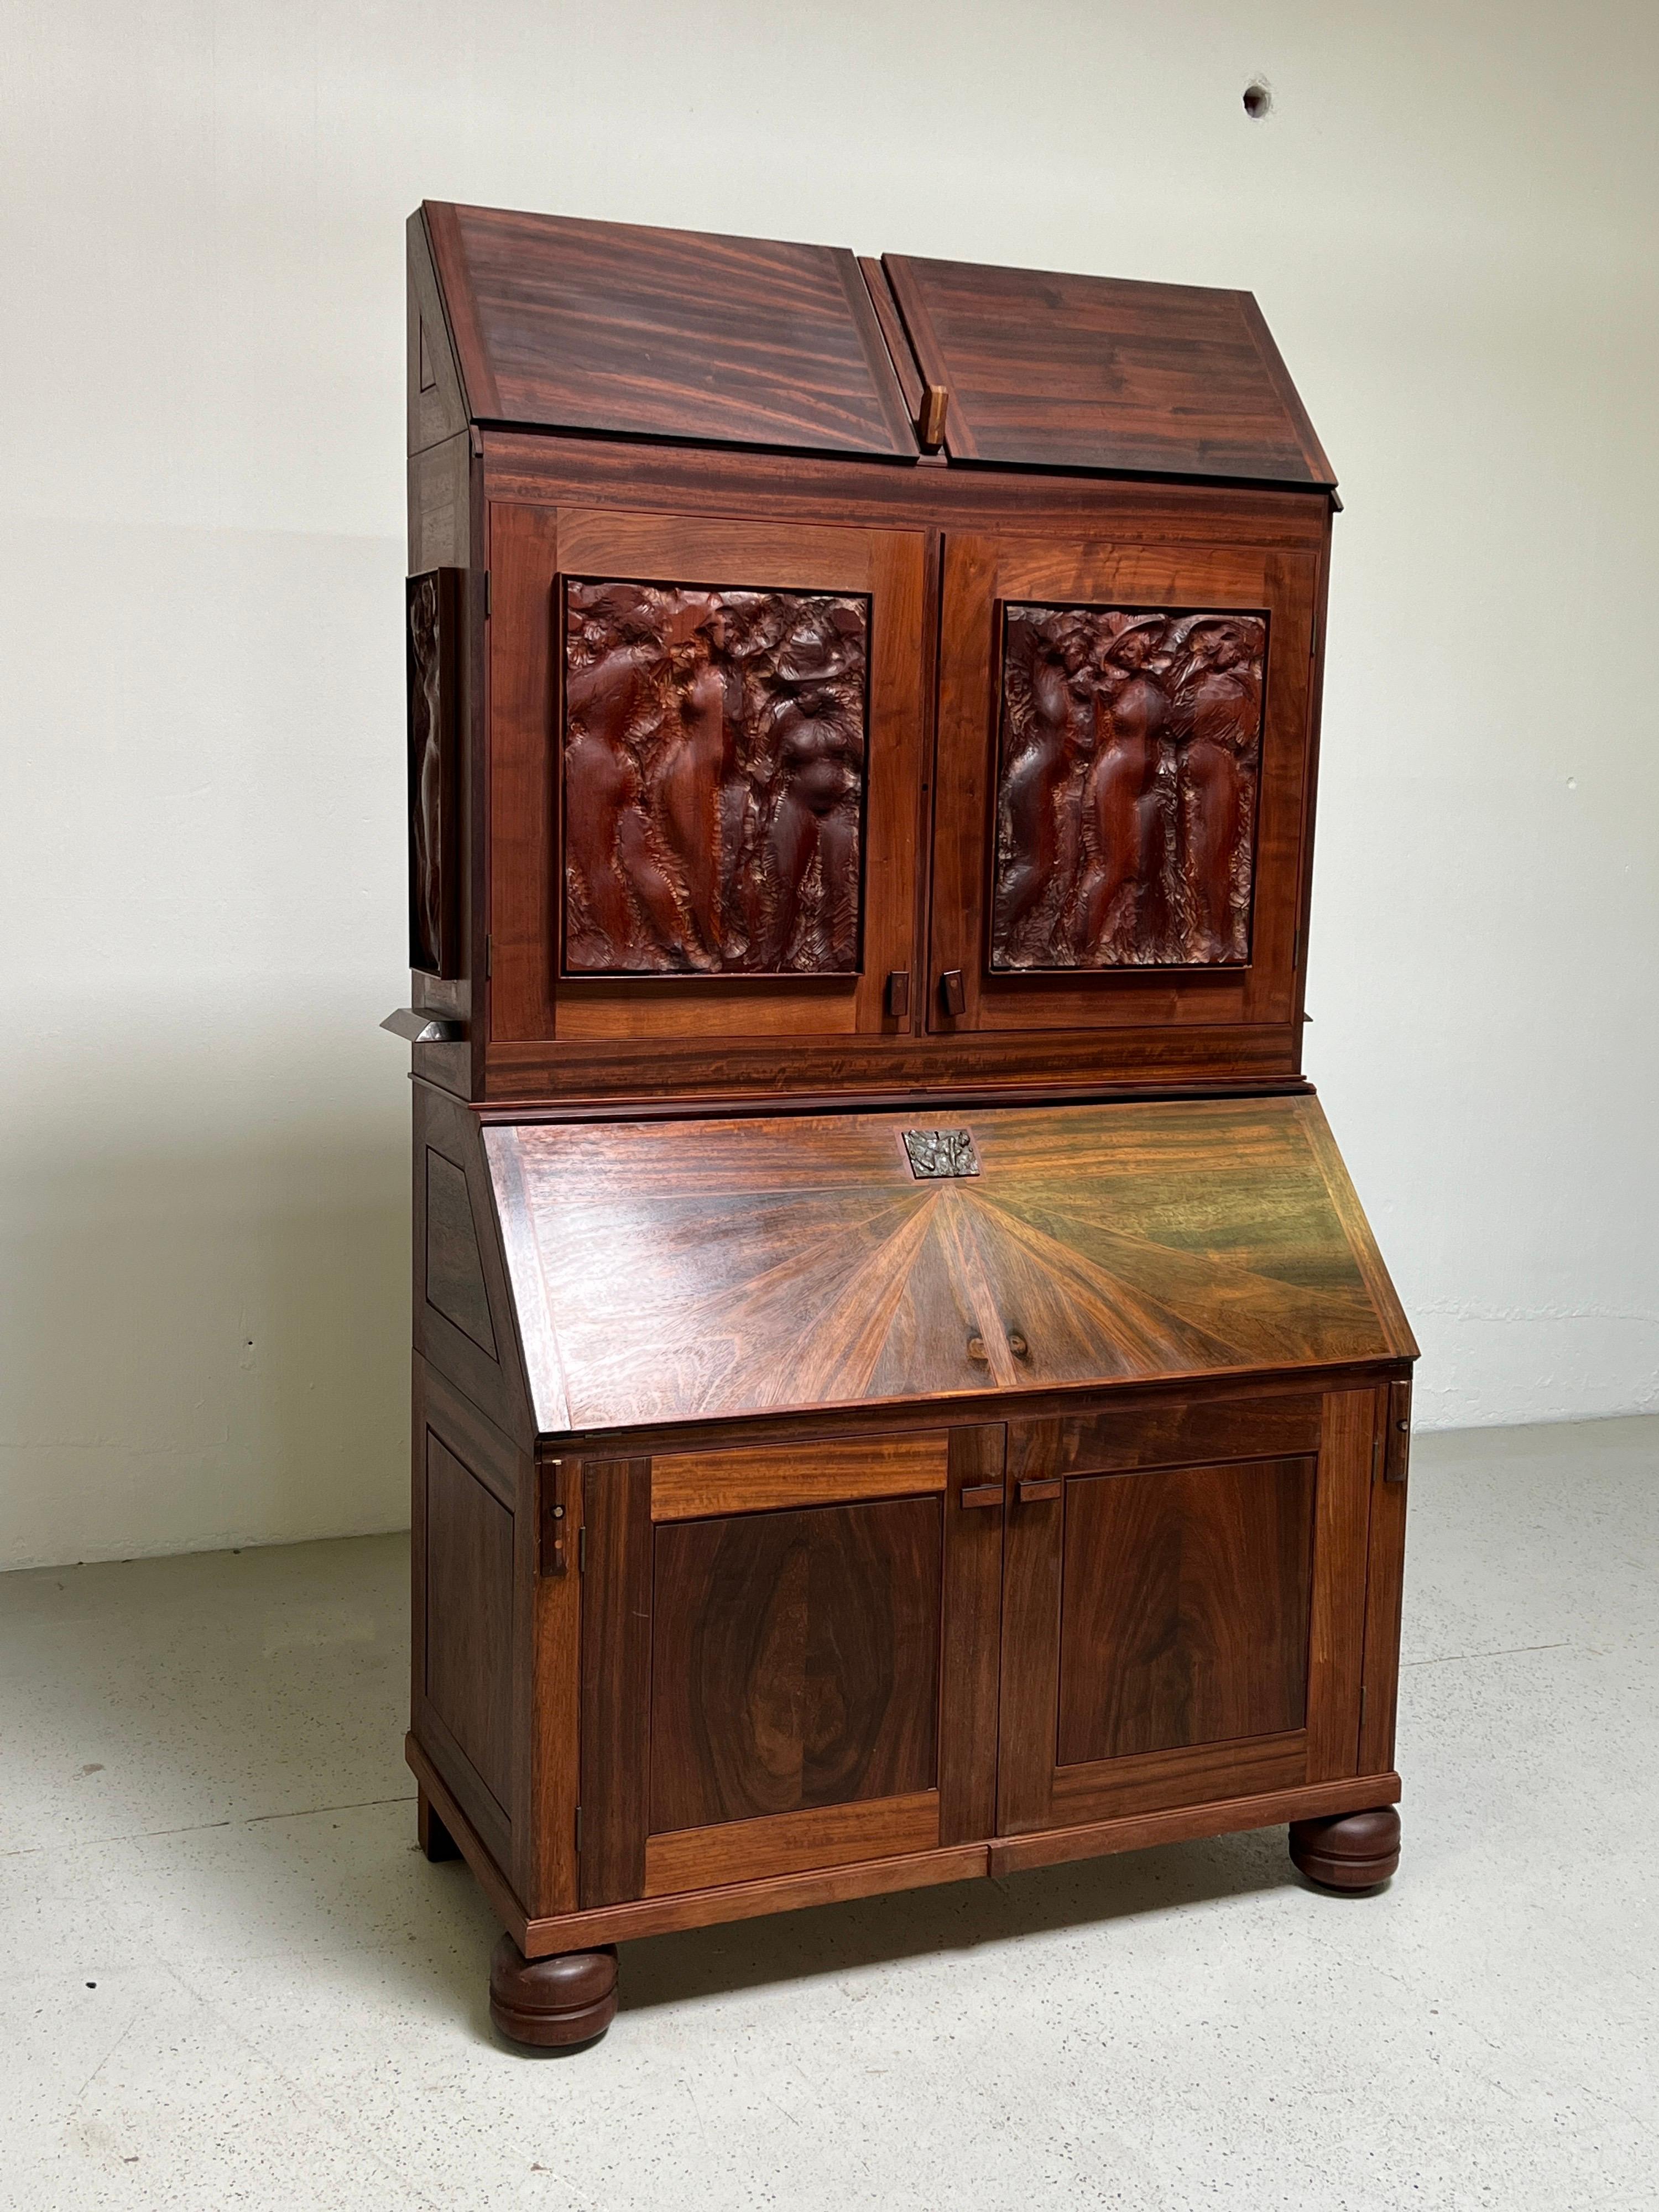 An incredibly crafted drop front secretary desk by Karel Mikolas. Made from various solid hardwoods with carved panels and a cast bronze key escutcheon.